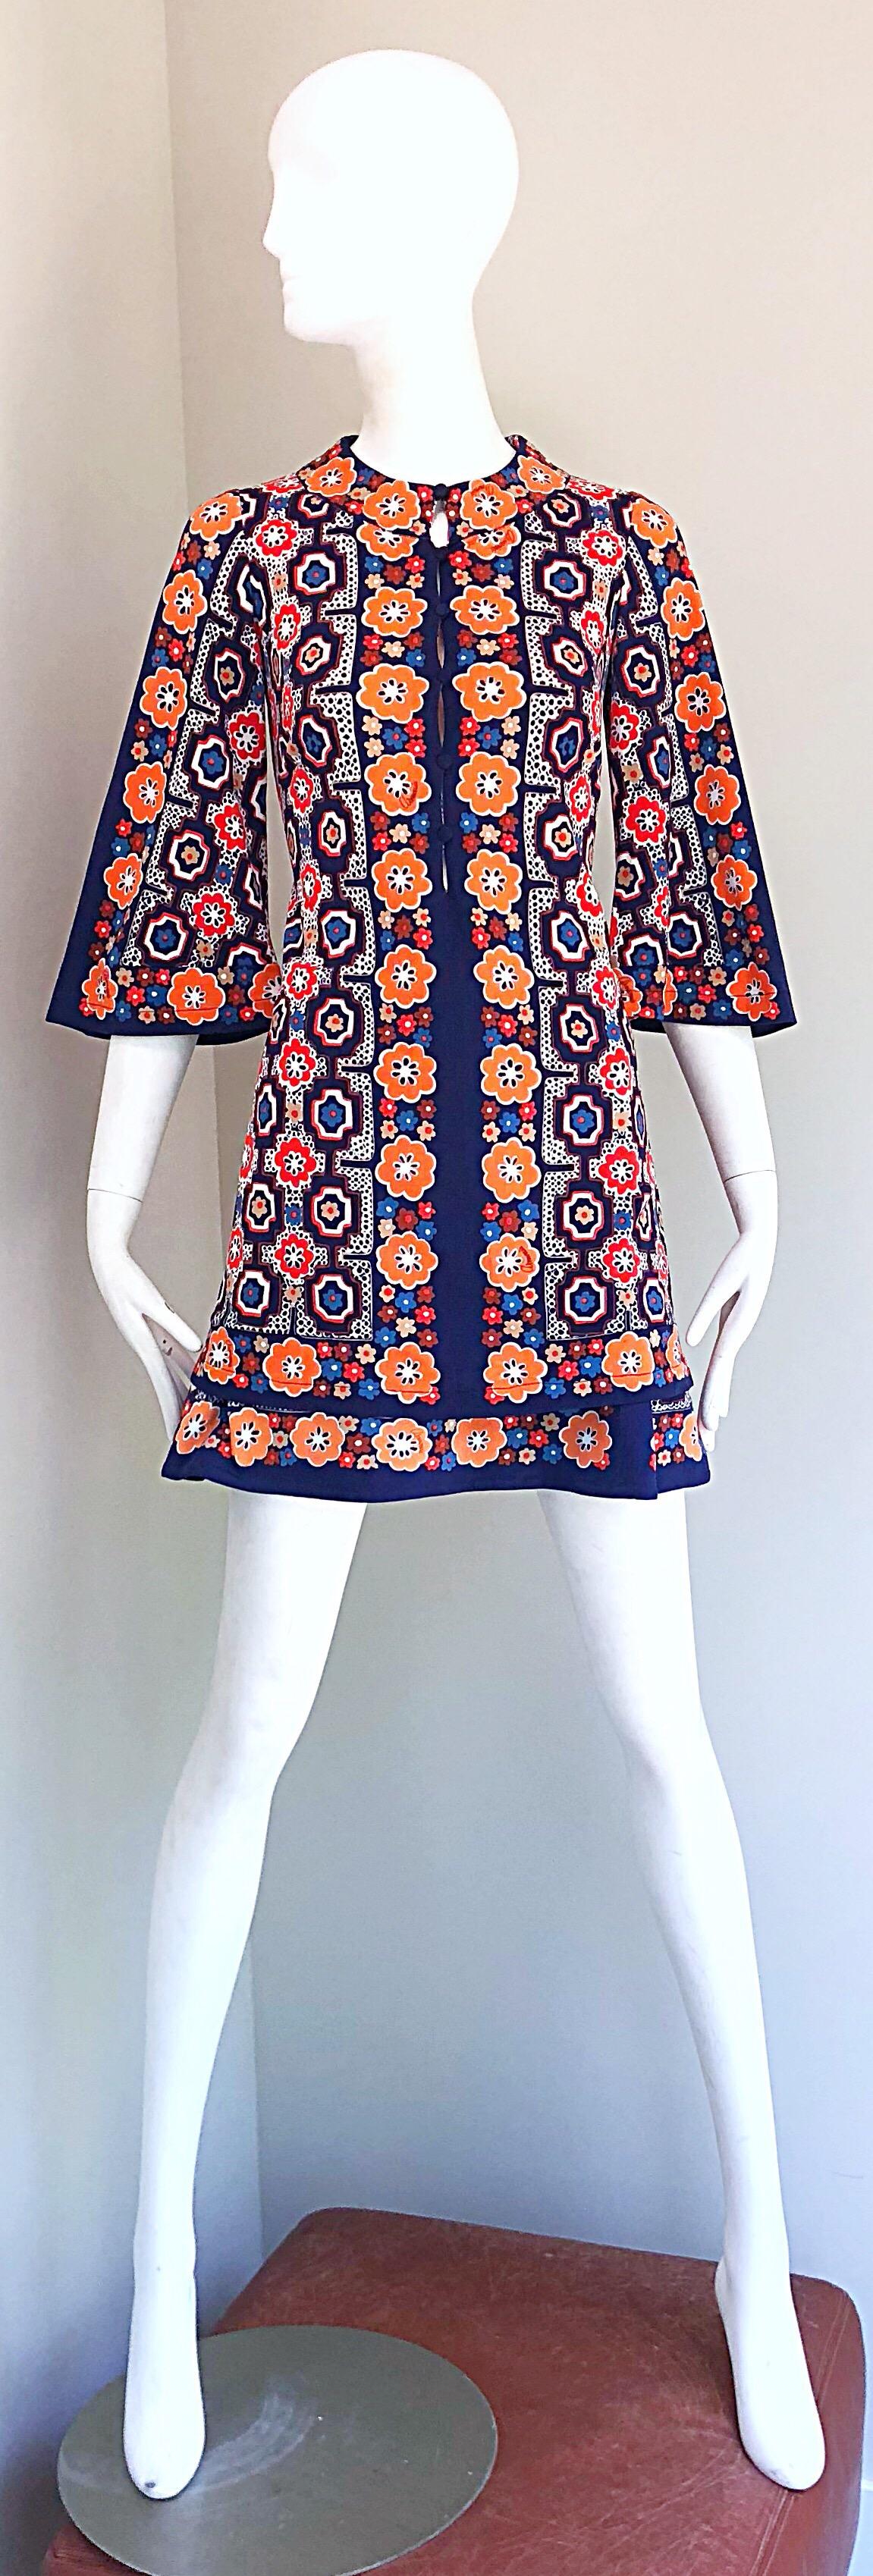 Chic 1960s ARMONIA Italian made jersey tunic and mini skirt ensemble! Features abstract and flower prints throughout in vibrant colors of orange, navy blue, tan, and light blue. Tunic buttons up the front and has dramatic bell sleeves. Mini A-line